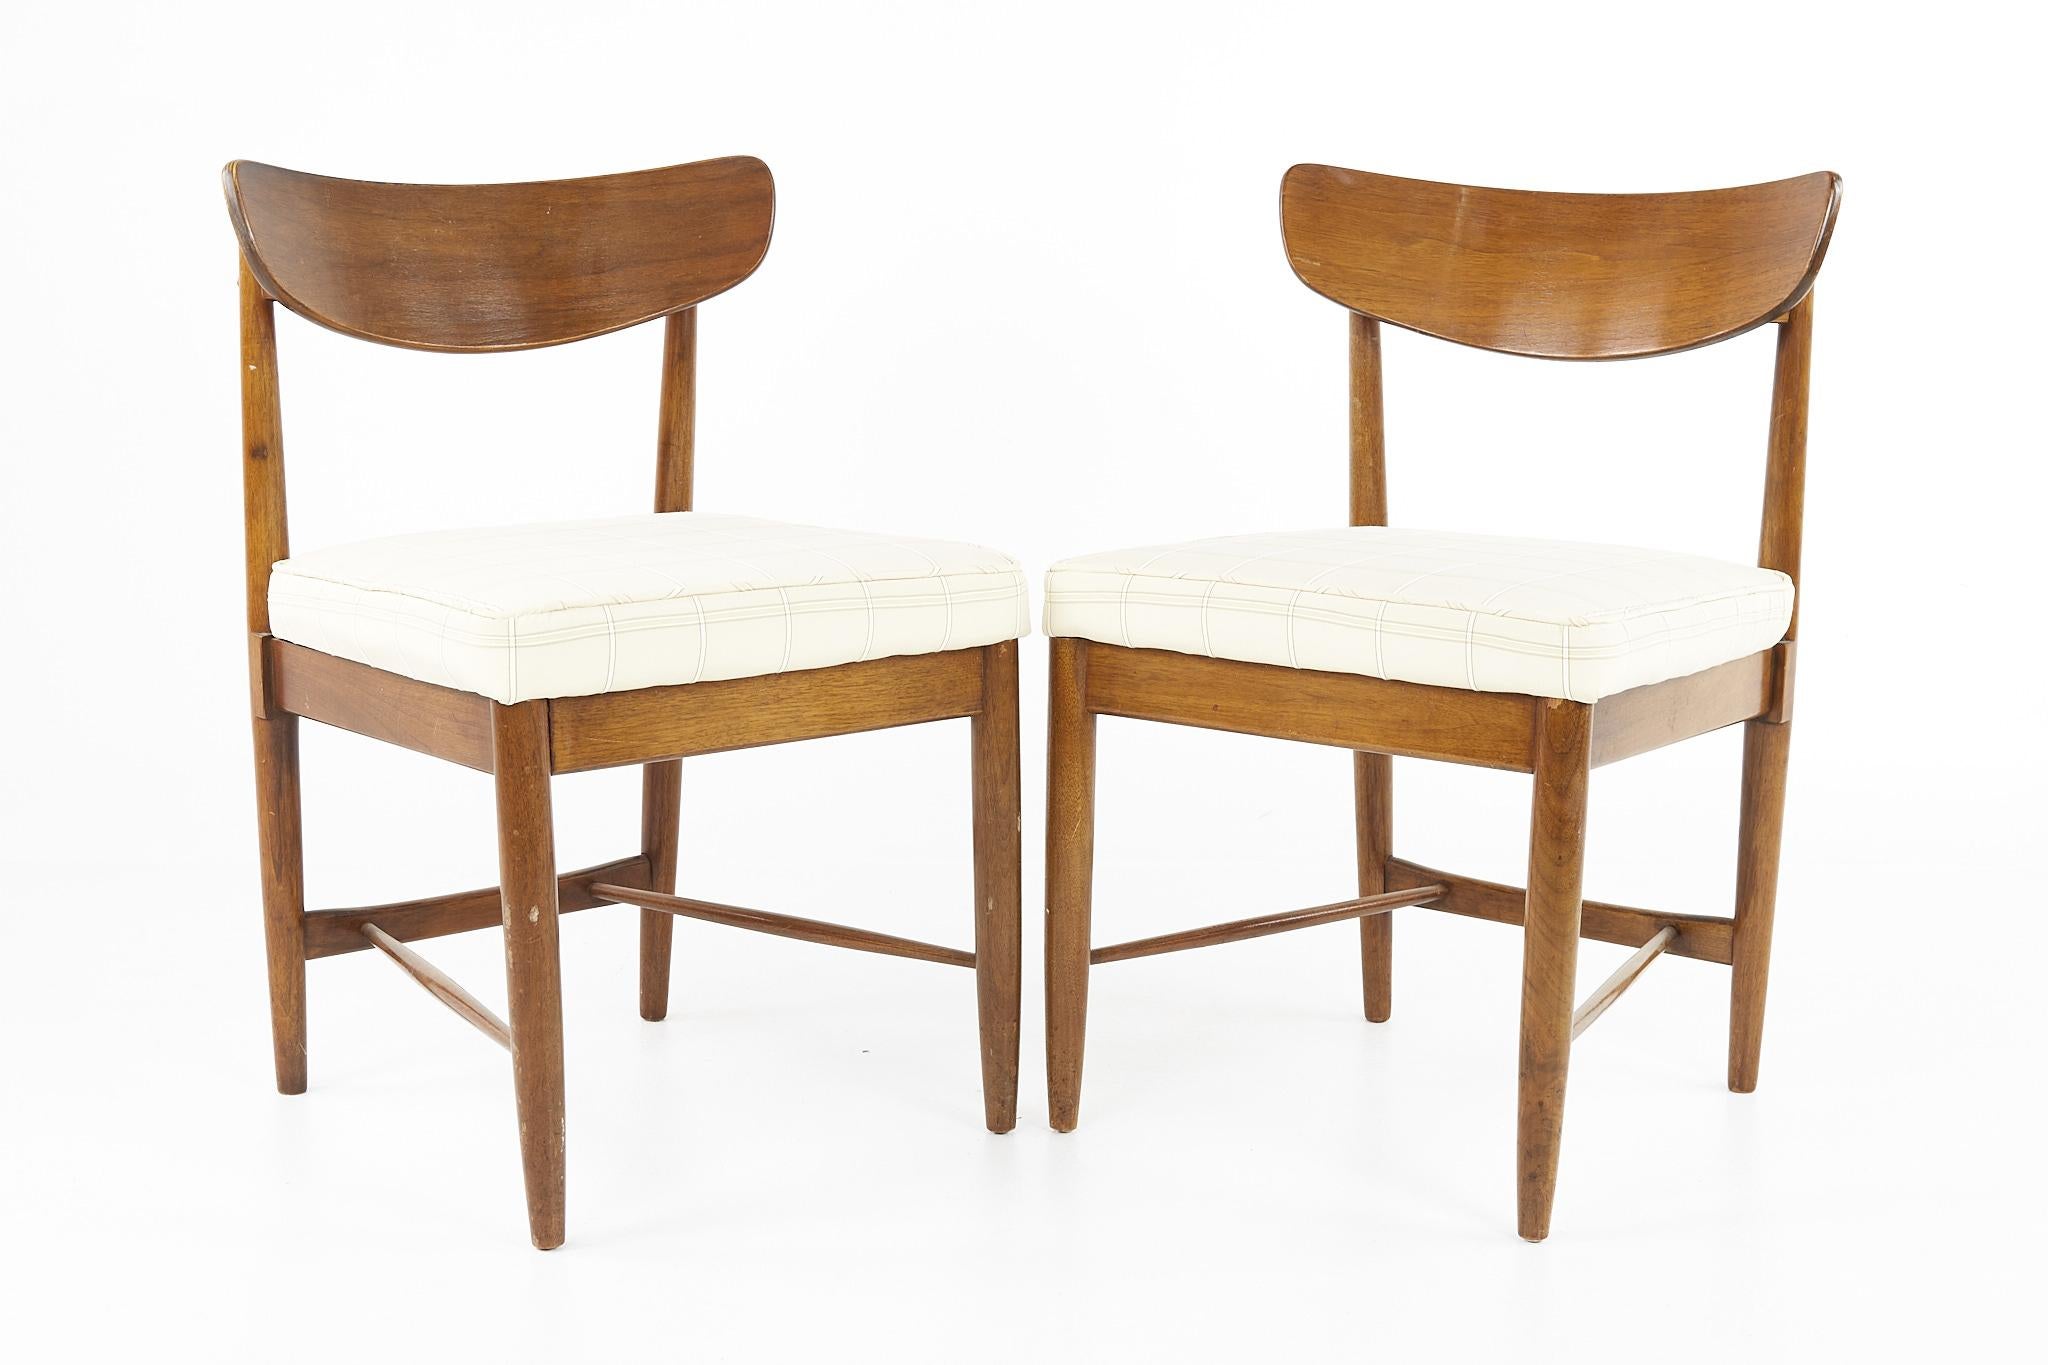 Late 20th Century American of Martinsville Dania Mid Century Walnut Dining Chairs, Set of 6